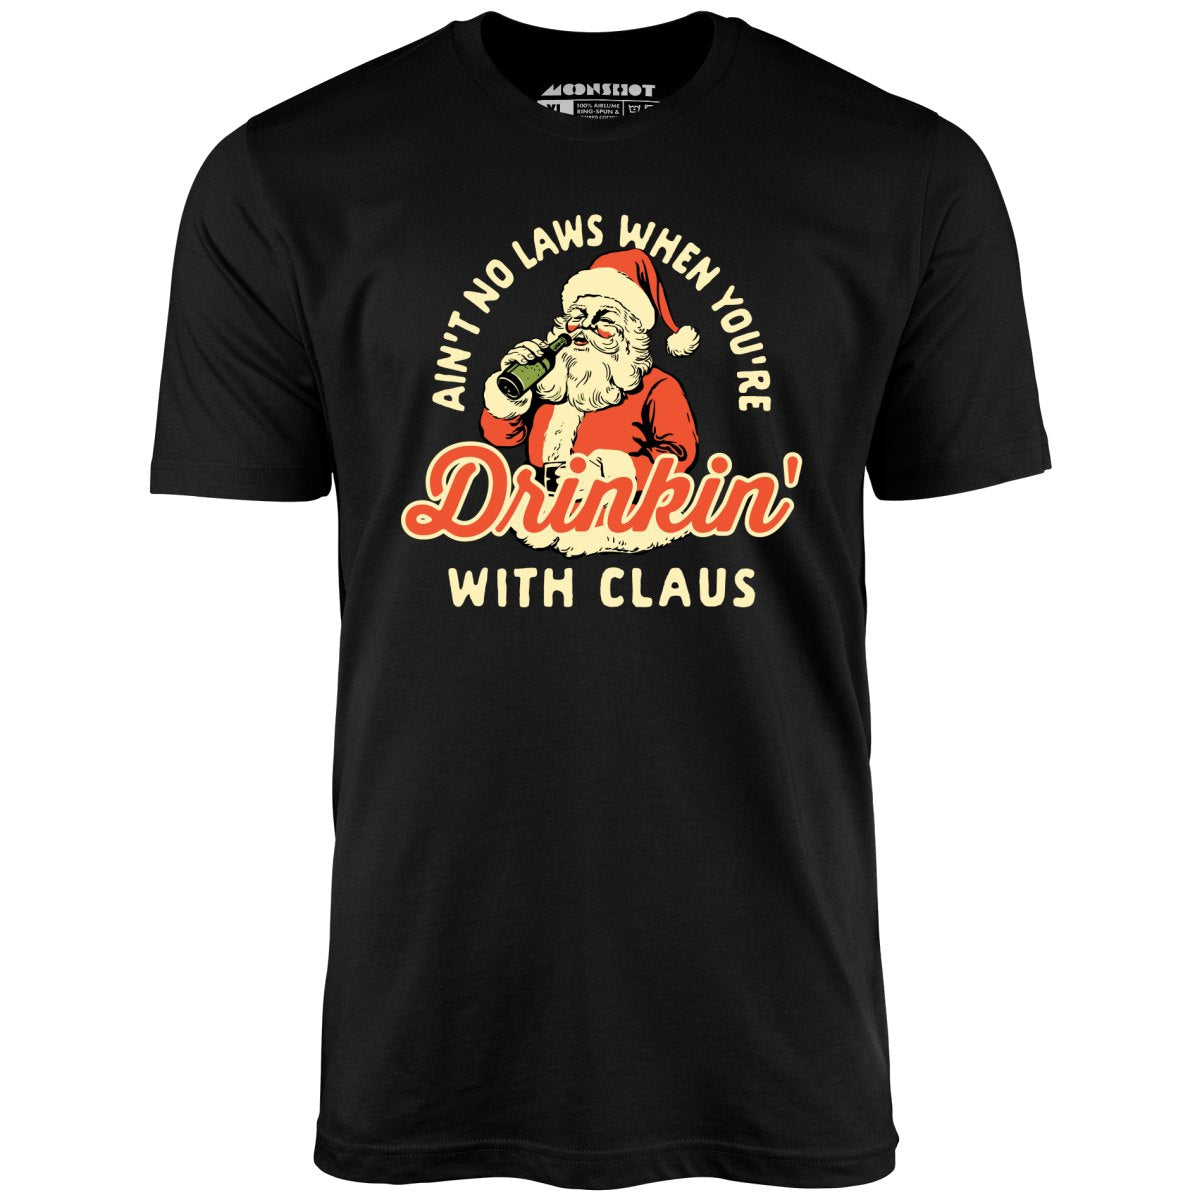 Ain't No Laws When You're Drinkin' With Claus - Unisex T-Shirt